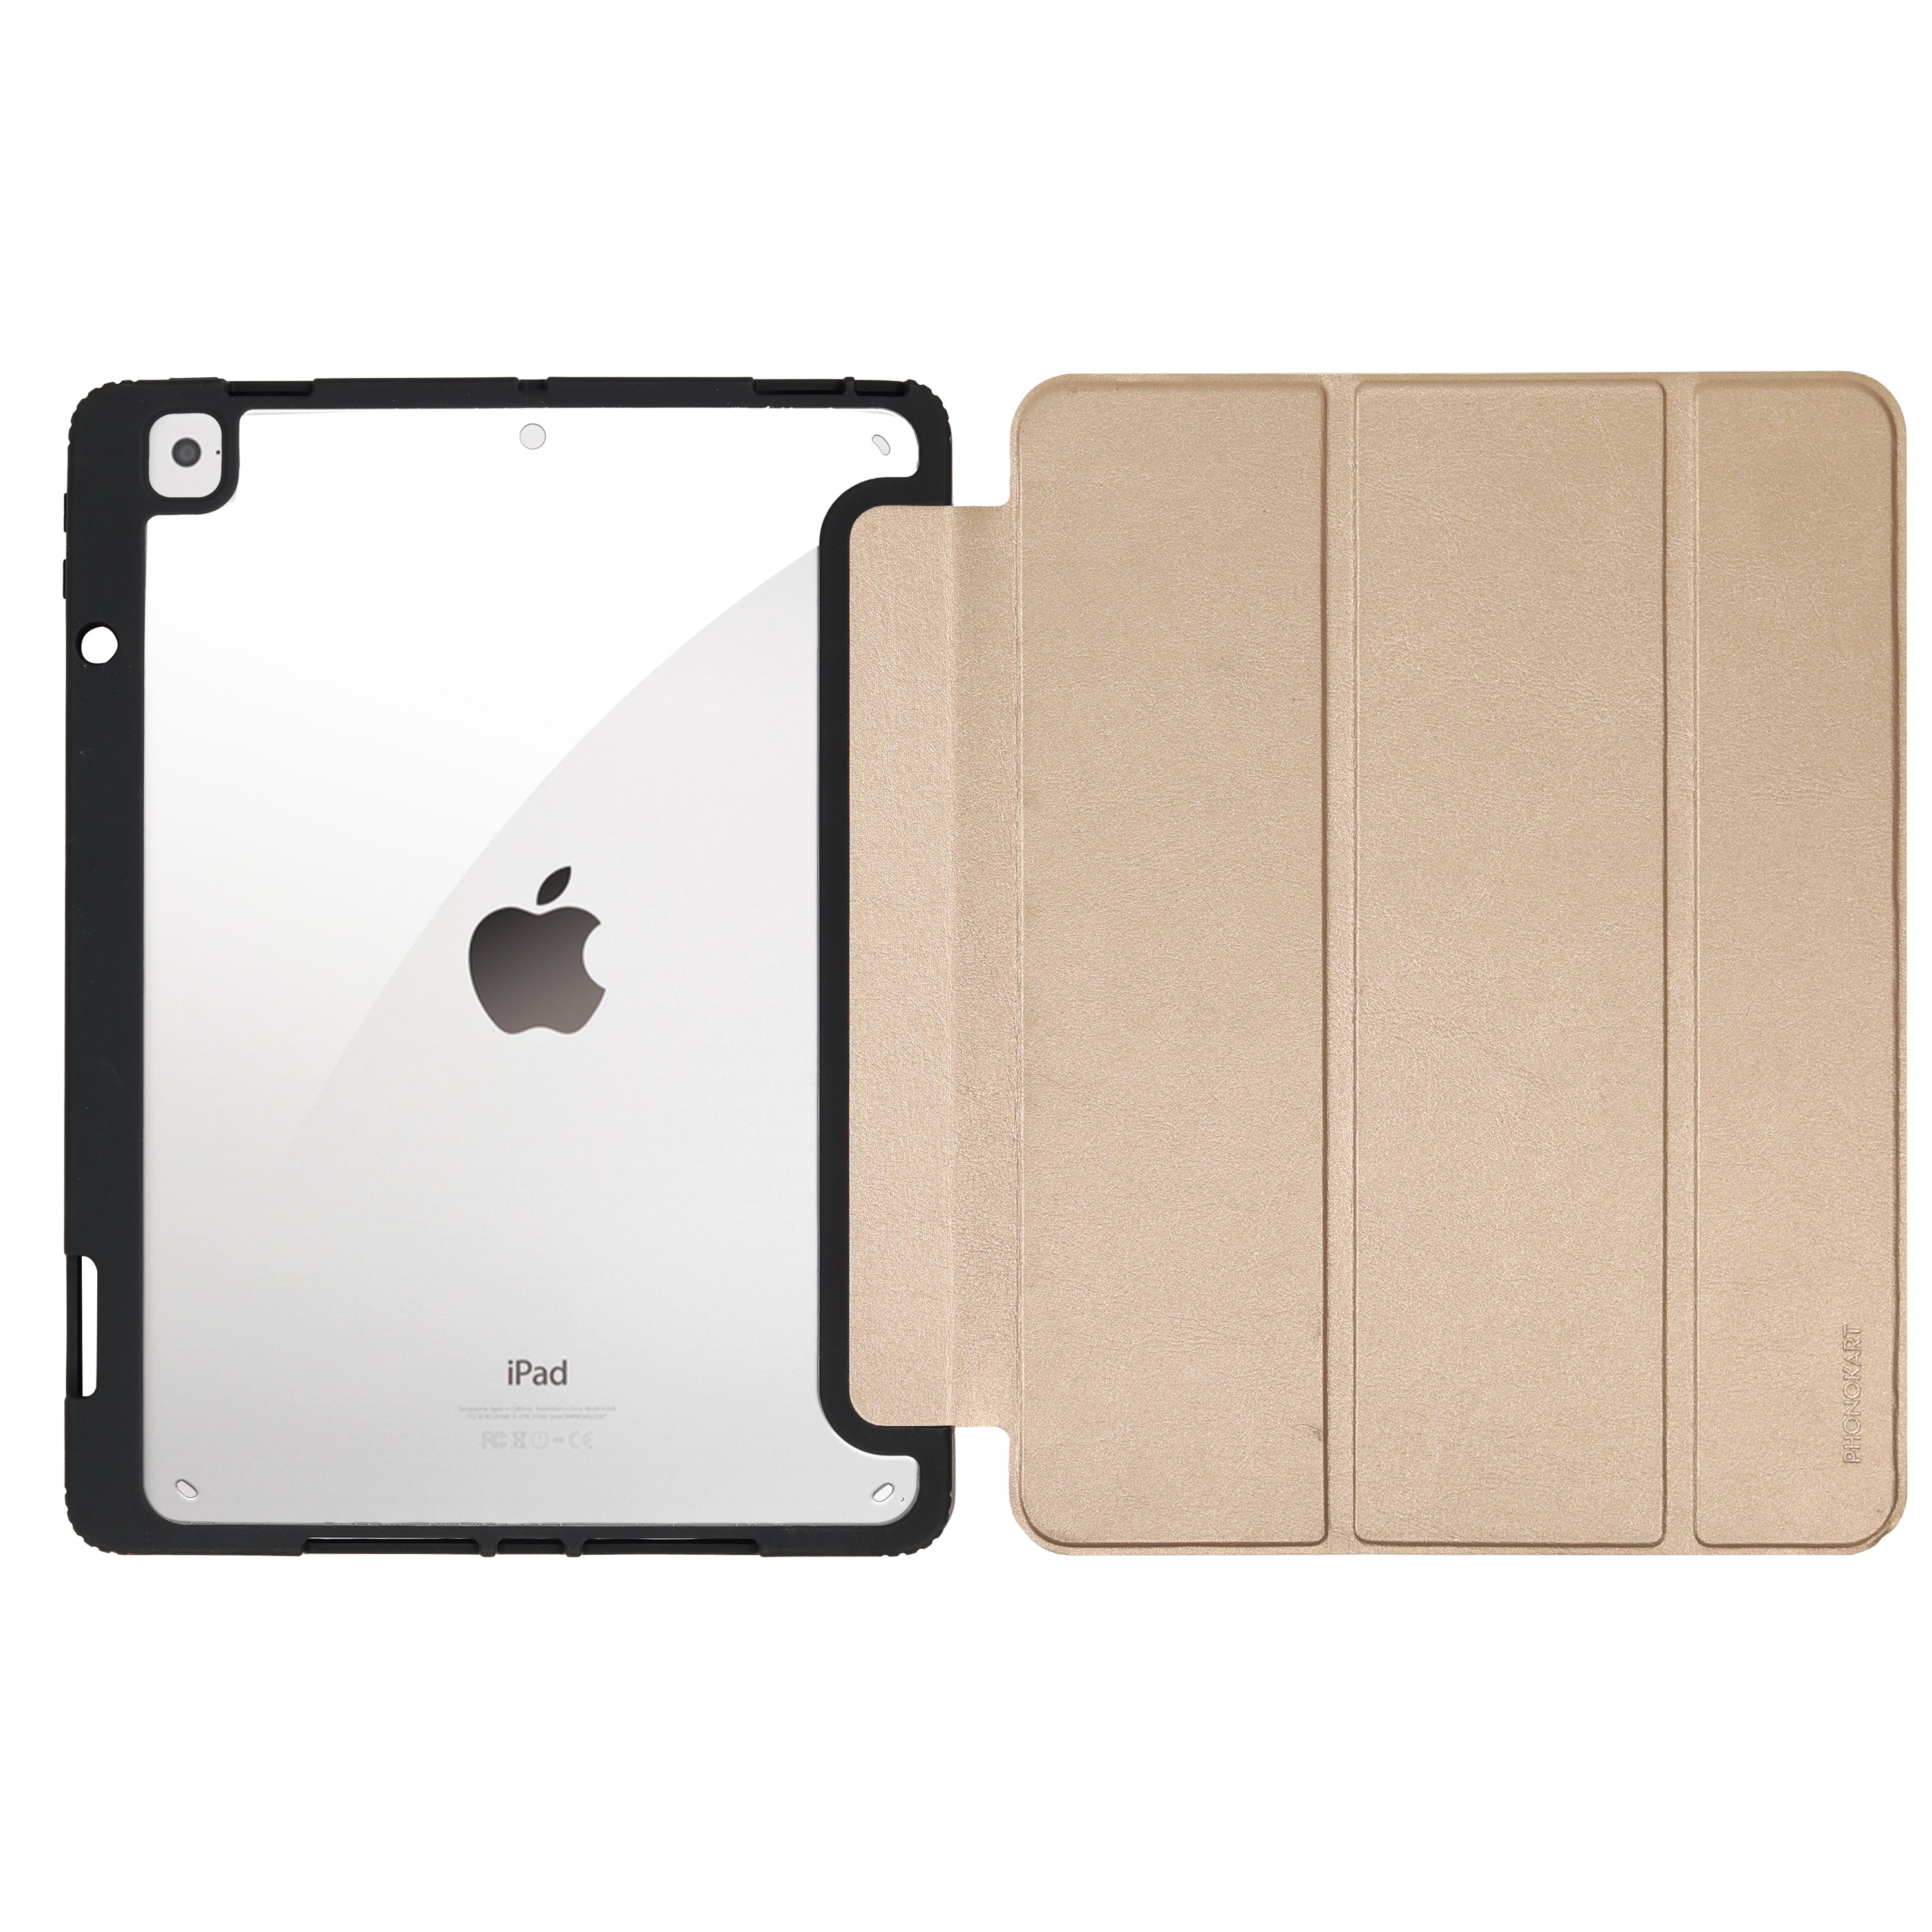 ARMOR FLIP CASE FOR IPAD 10.2/10.5 INCH WITH PENCIL HOLDER (I PAD 7,8,9 Gen, Air 3rd Gen, IPad Pro)